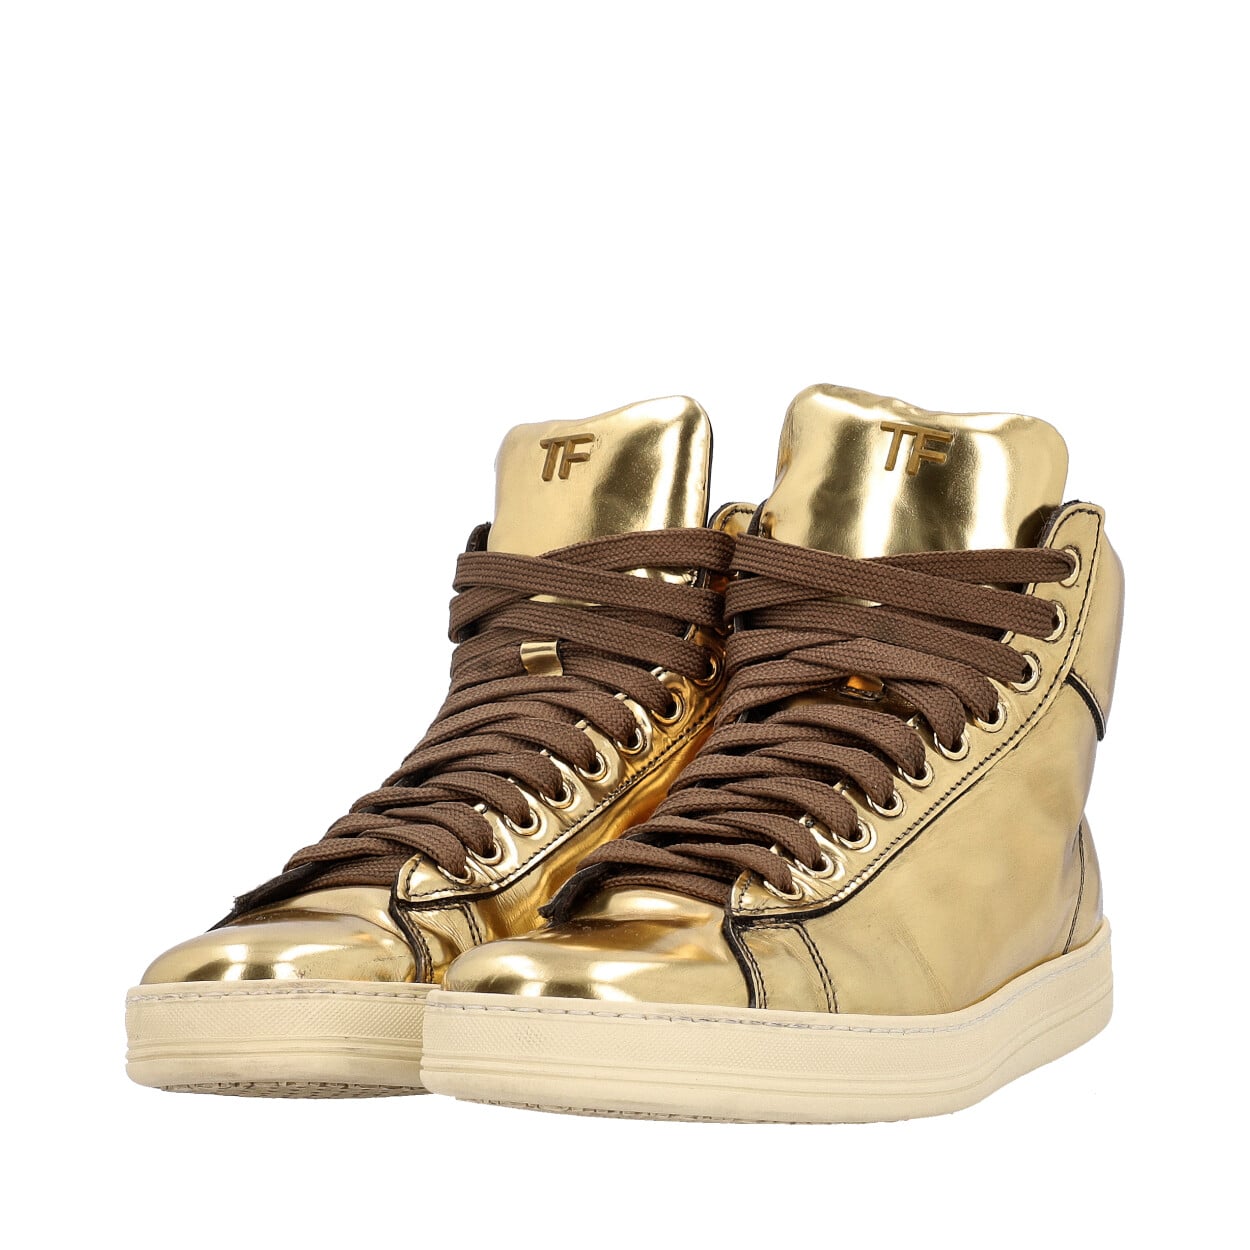 TOM FORD Metallic High Top Sneakers Gold | Luxity